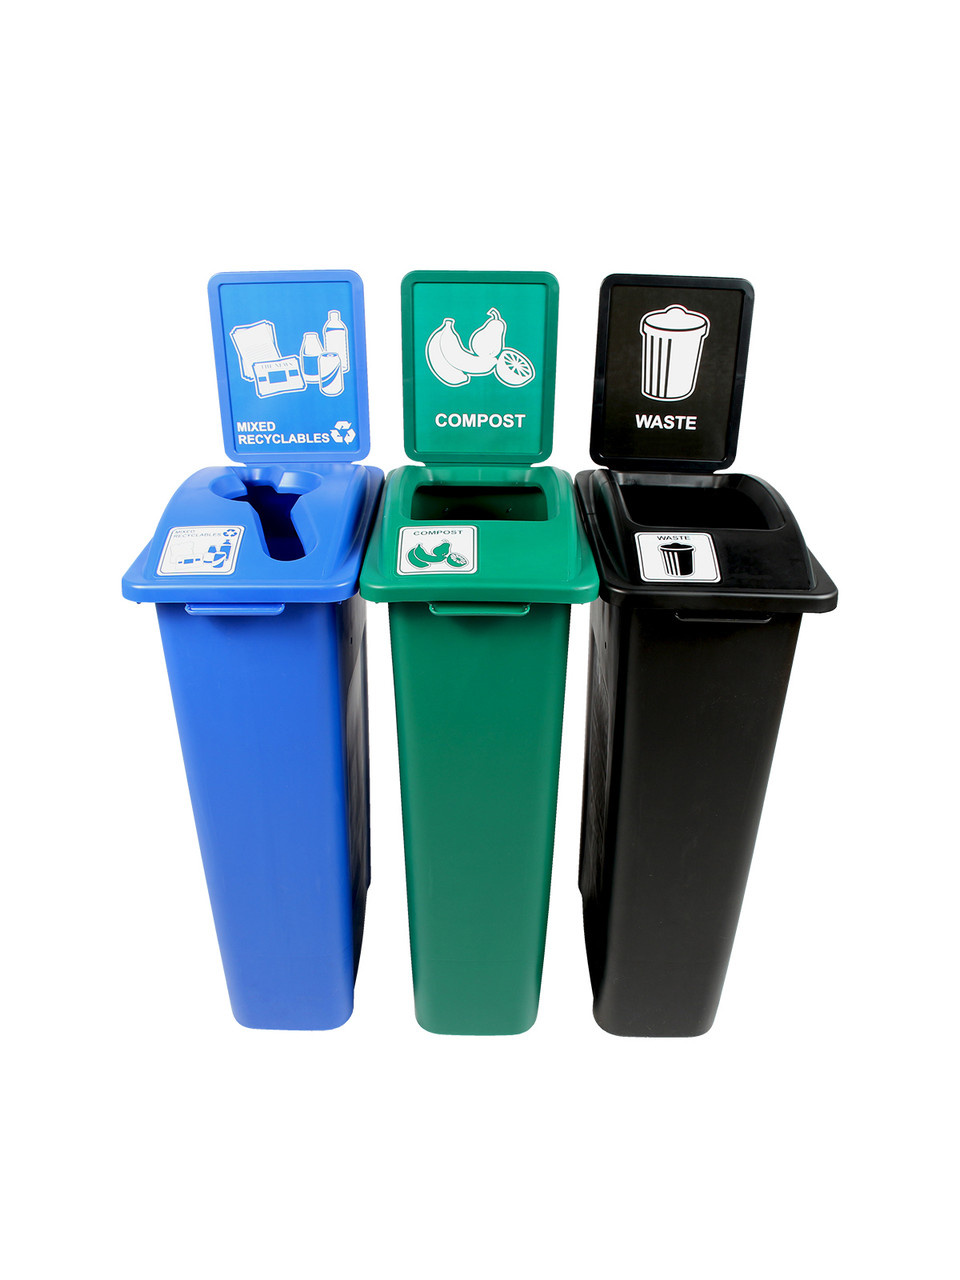 69 Gallon Simple Sort Skinny Recycling Station 8106053-244 (Mixed, Compost, Waste Openings)